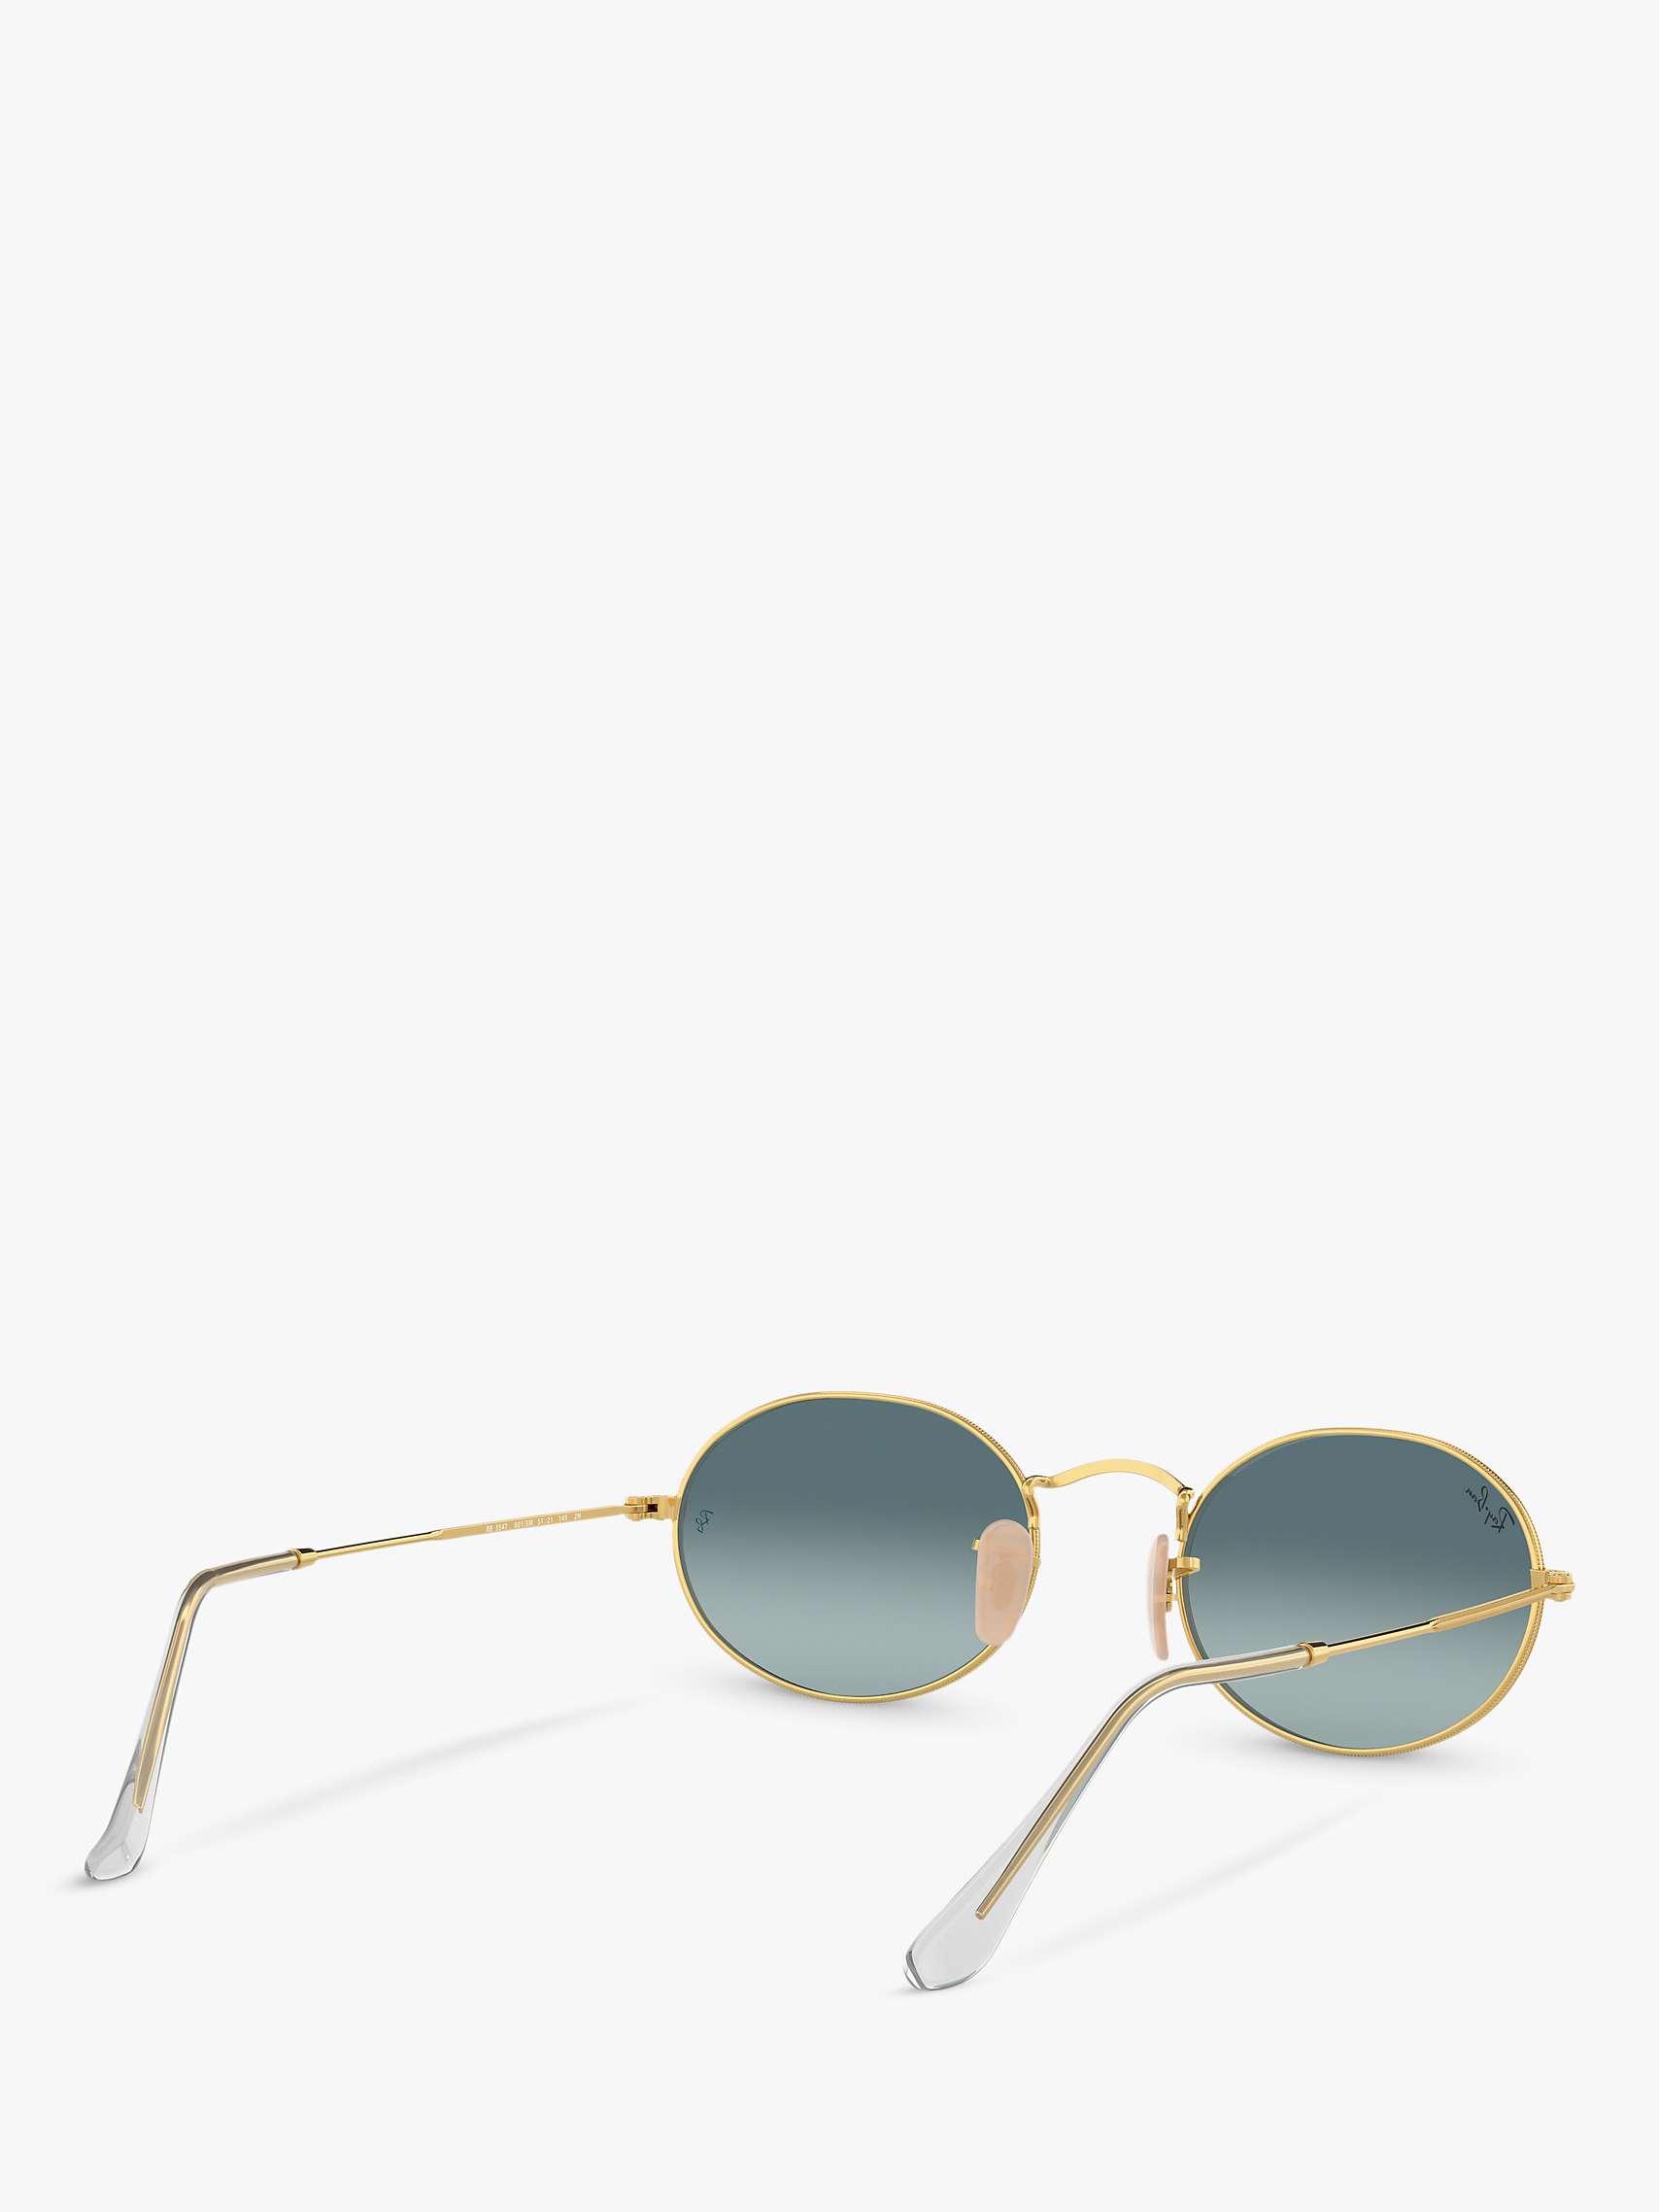 Buy Ray-Ban RB3547 Women's Oval Flat Lens Sunglasses, Gold/Grey Gradient Online at johnlewis.com